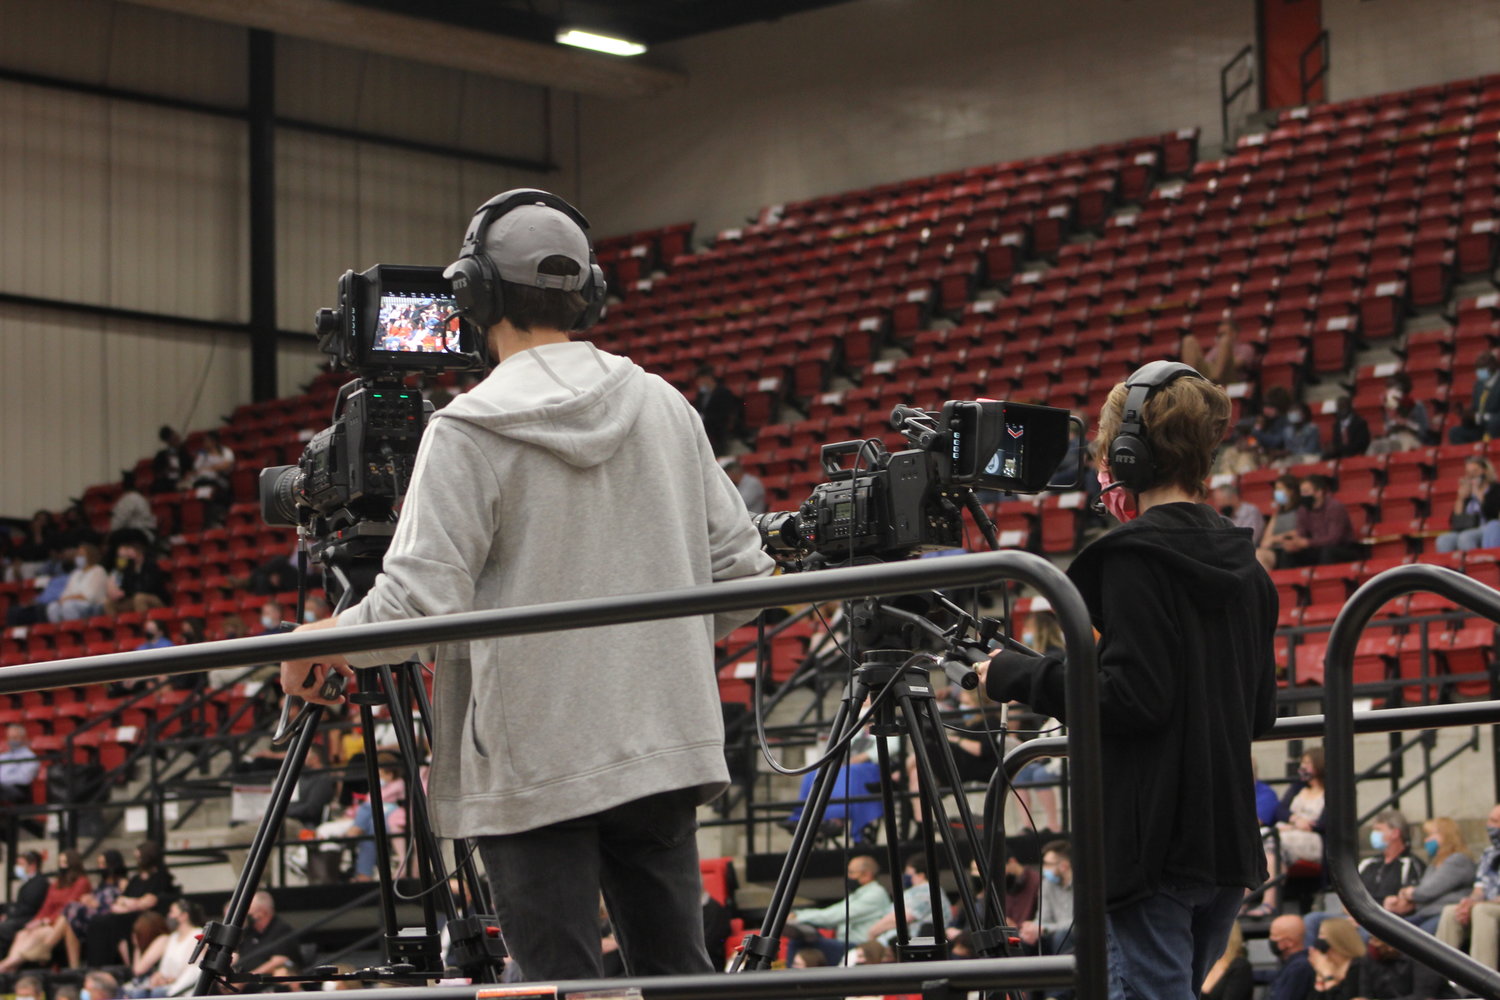 Each commencement ceremony was broadcast by University of Central Missouri students.